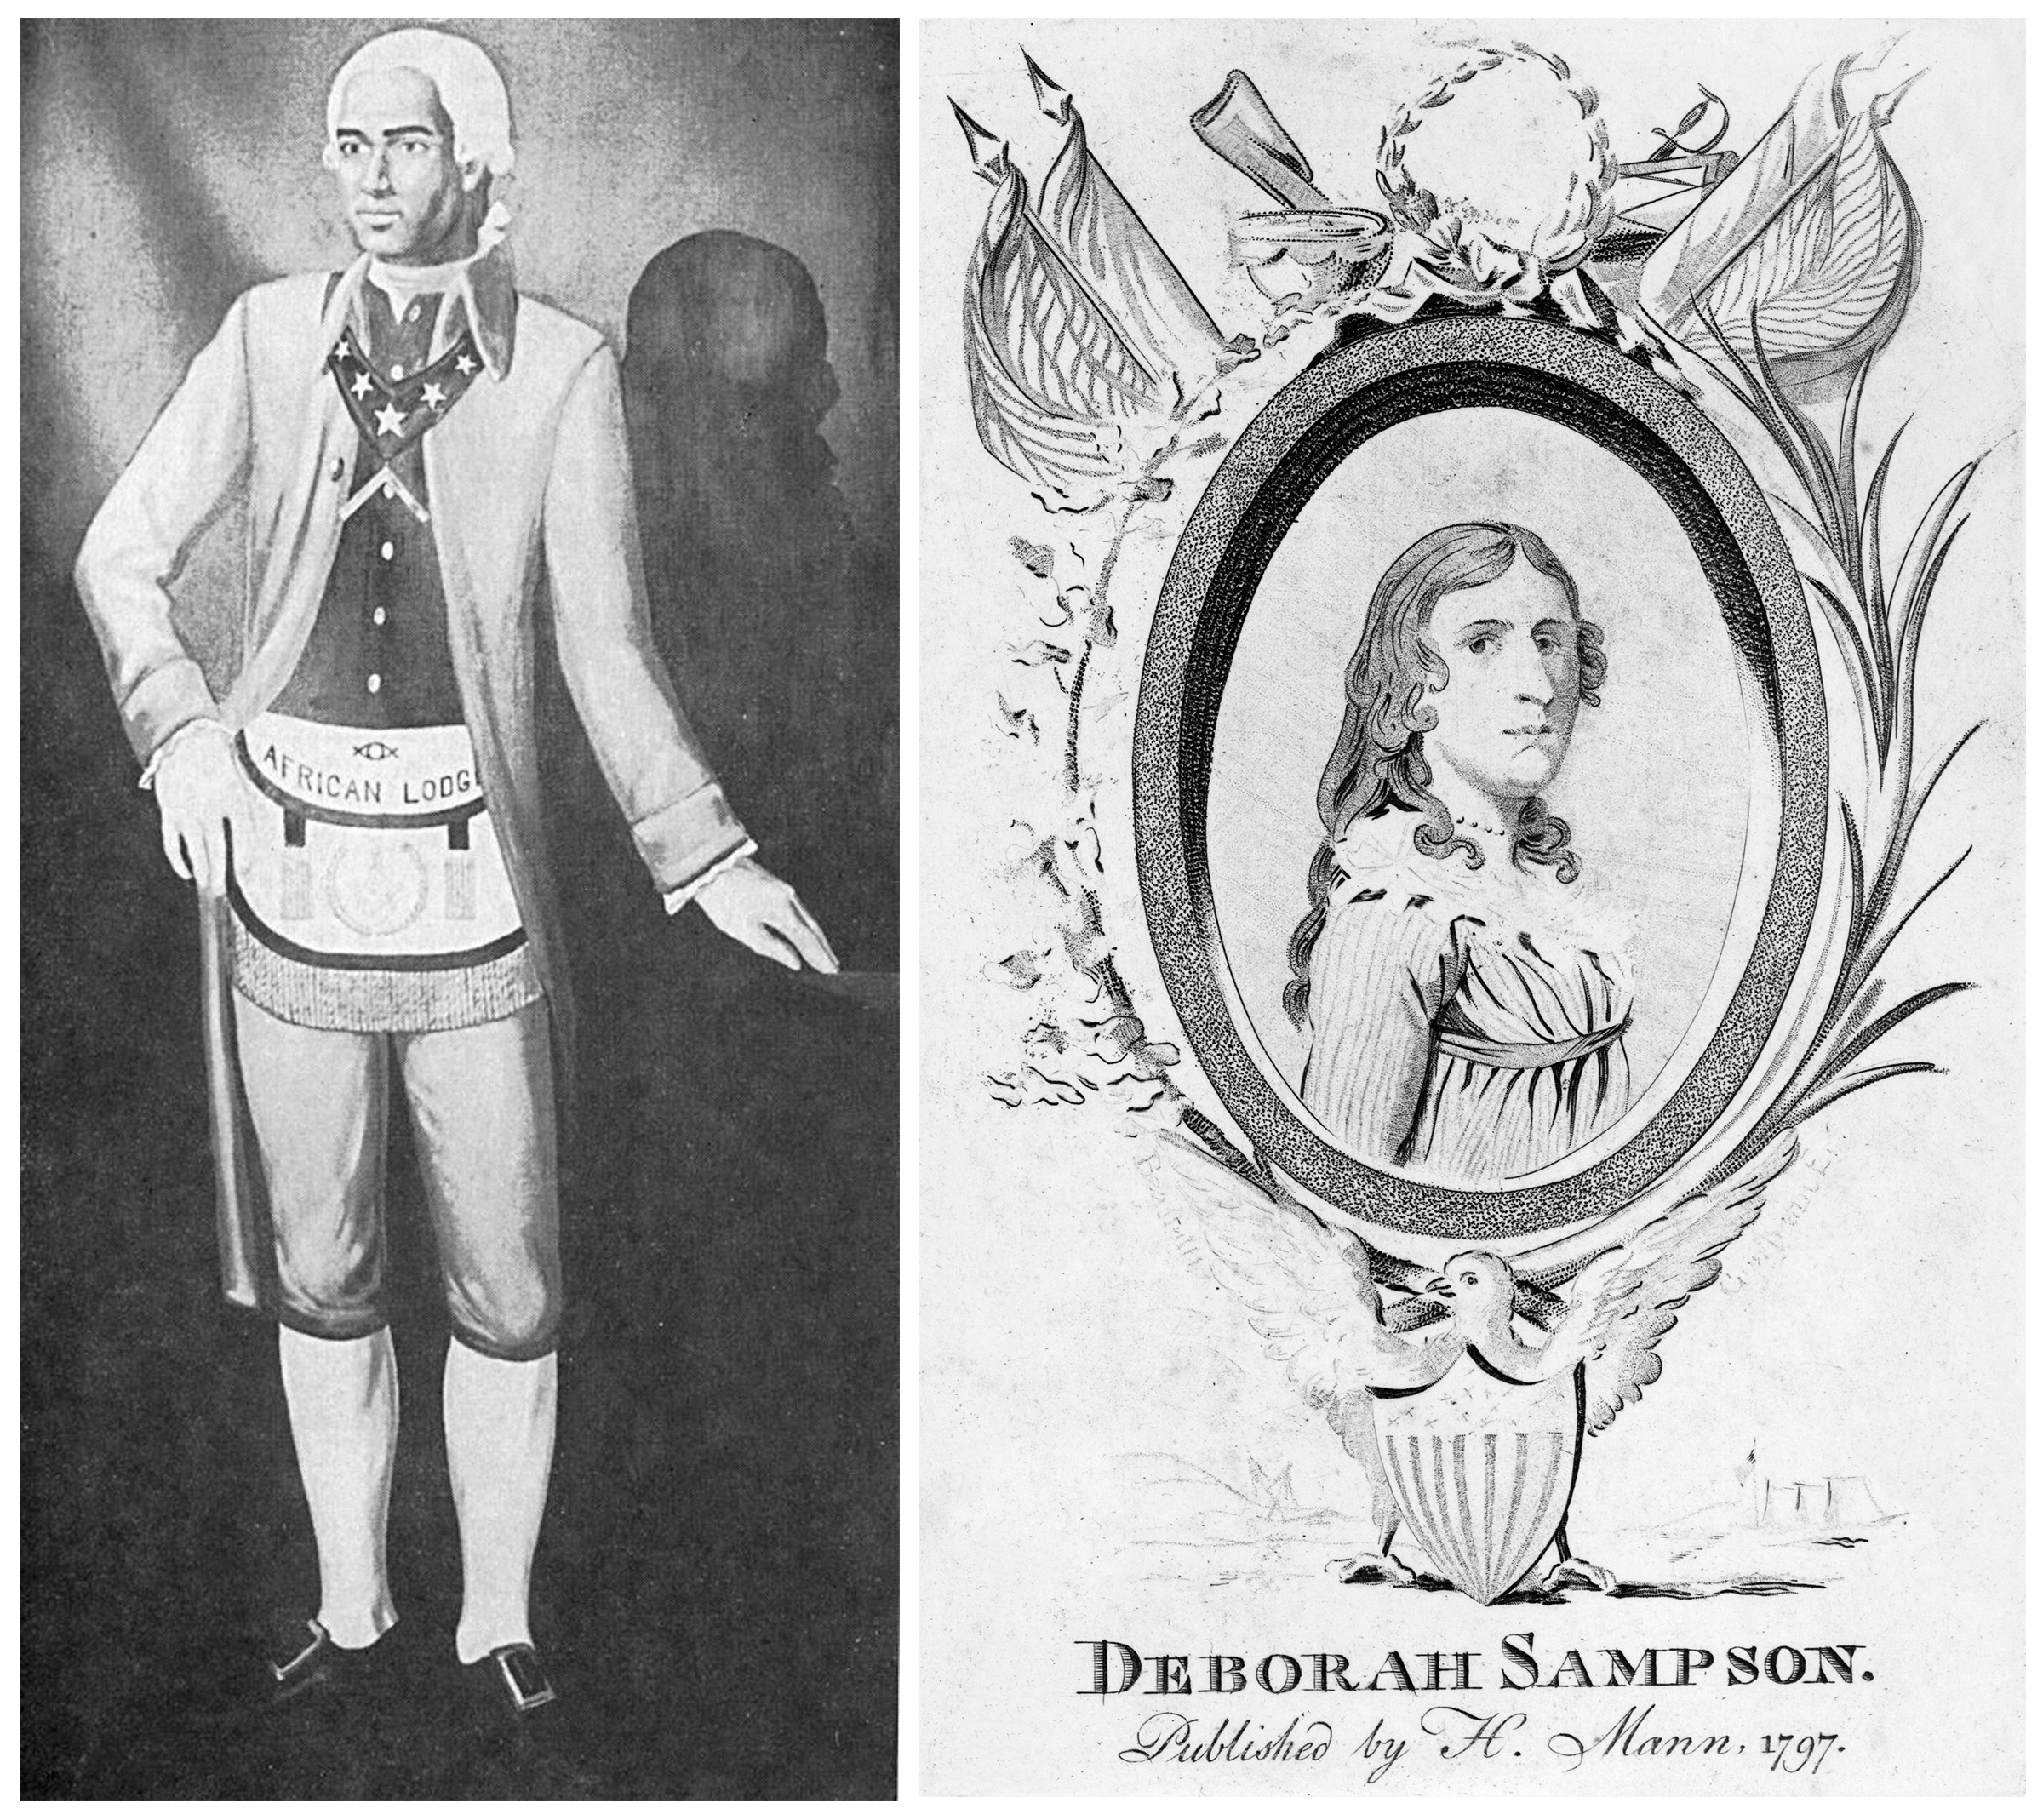 From left: A portrait of Prince Hall; an illustration of Deborah Sampson circa 1797